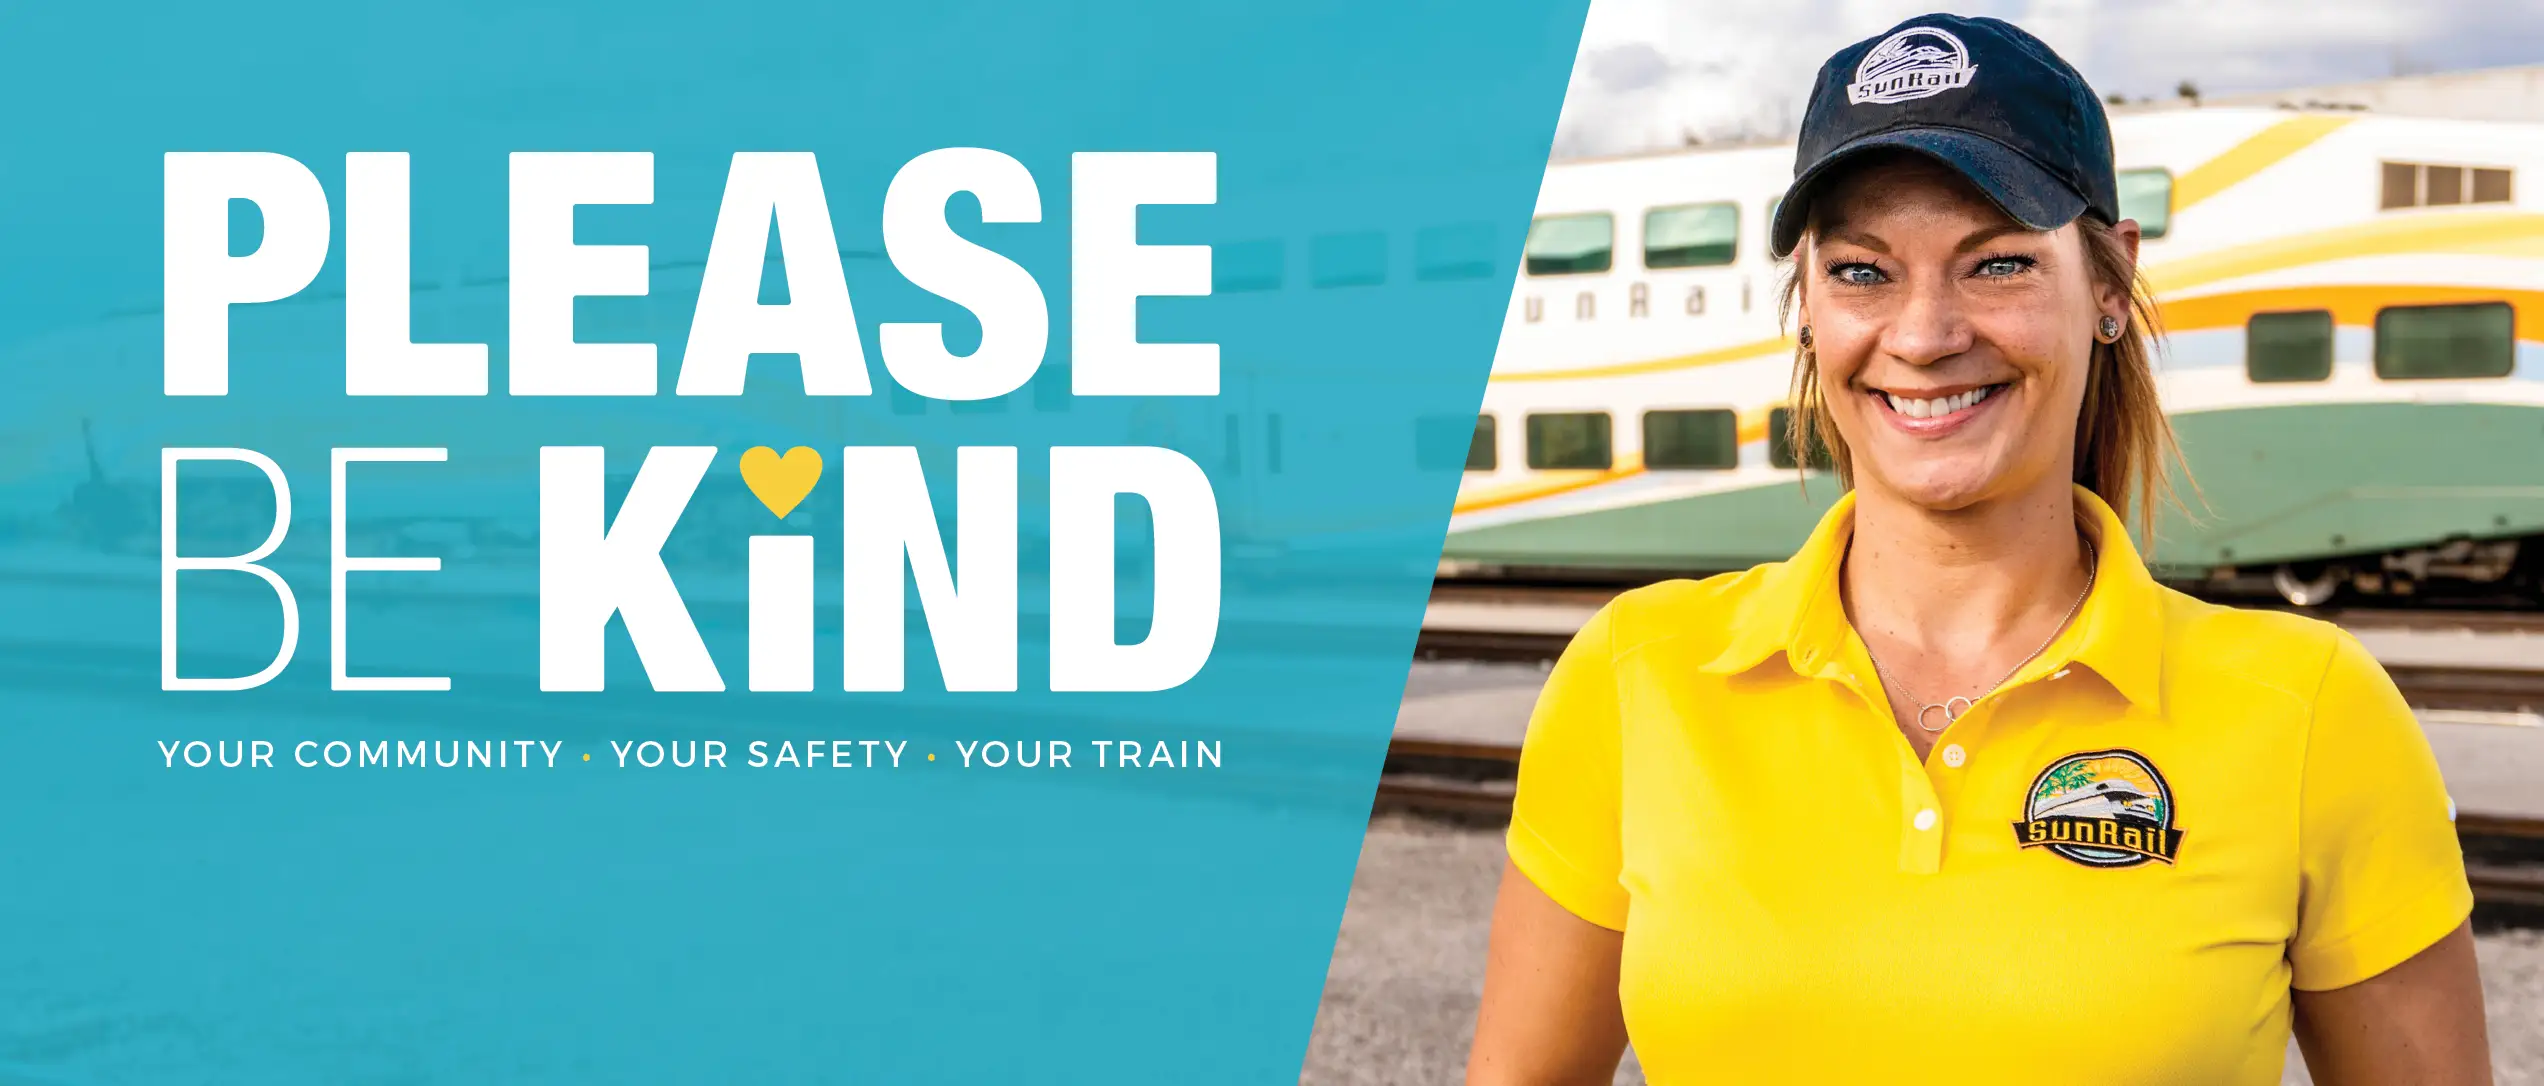 Please Be Kind. Your Community • Your Safety • Your Train